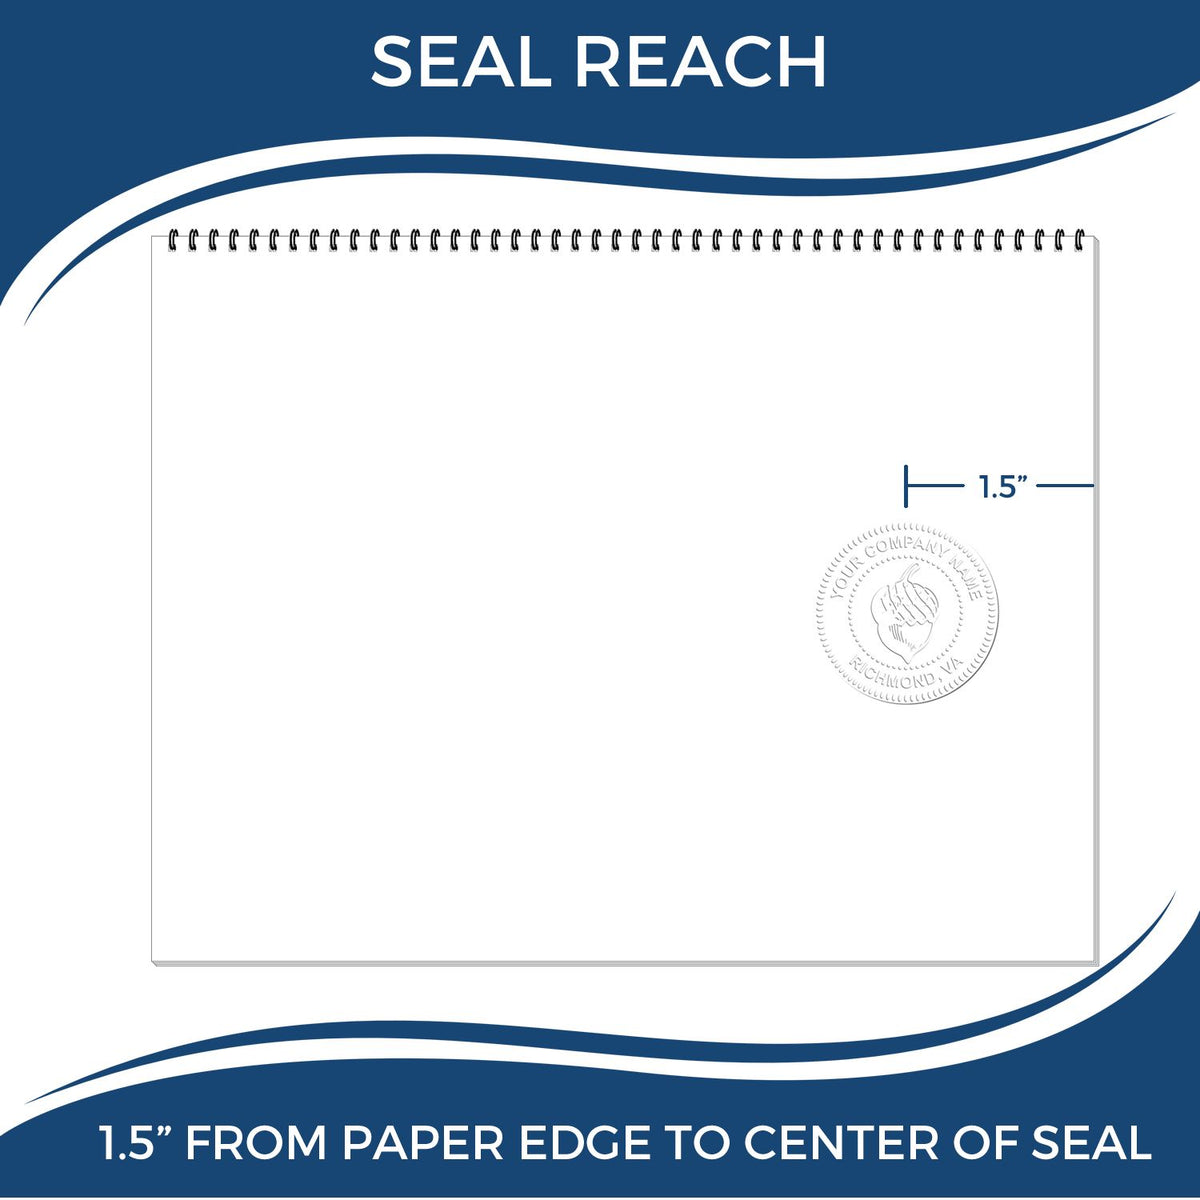 An infographic showing the seal reach which is represented by a ruler and a miniature seal image of the Hybrid Idaho Engineer Seal